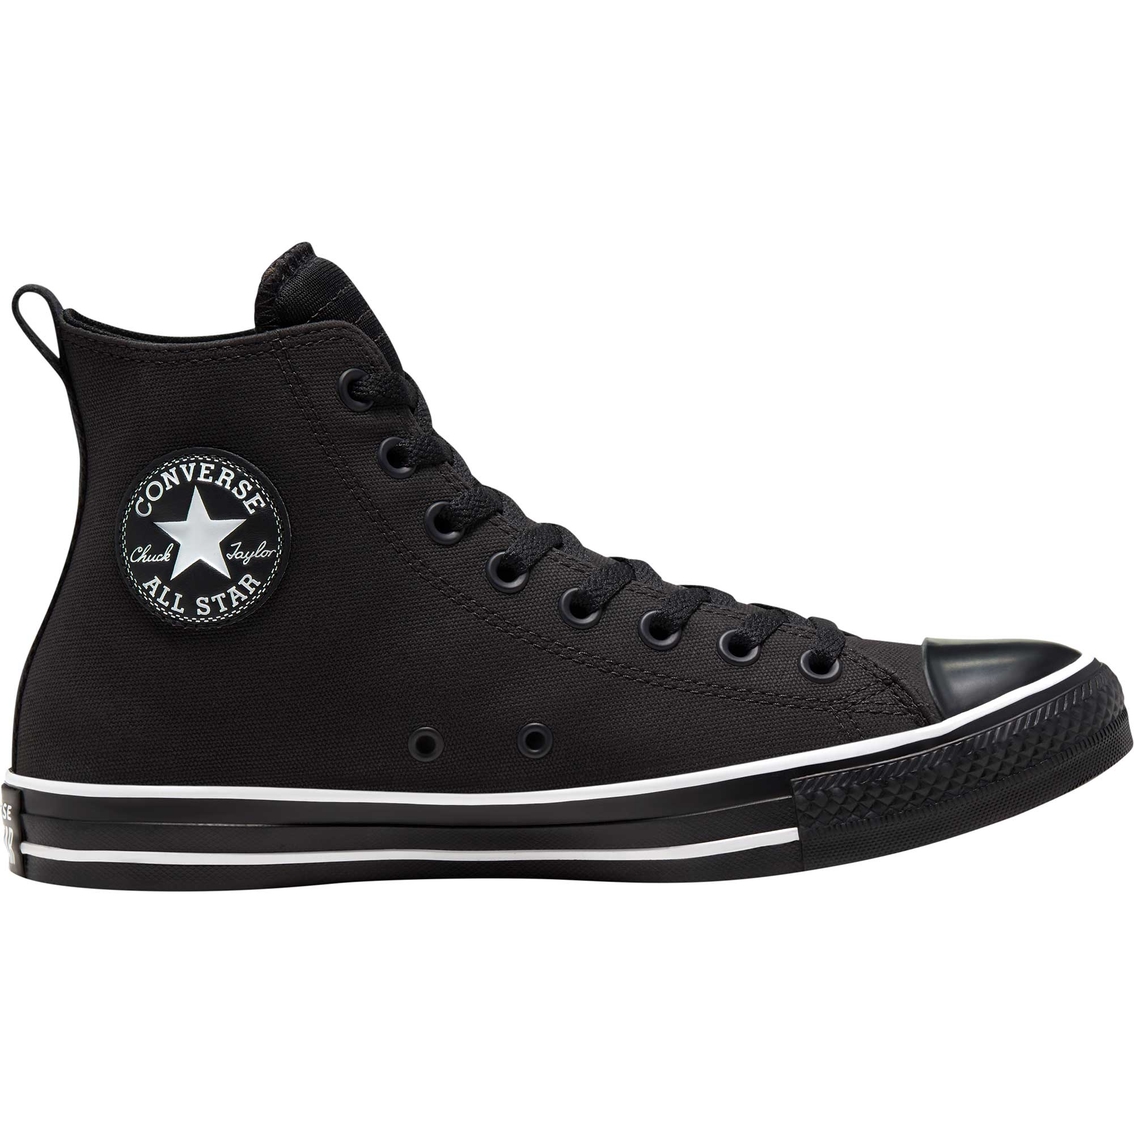 Converse Men's Chuck Taylor All Star Hi Sneakers | Sneakers | Shoes ...